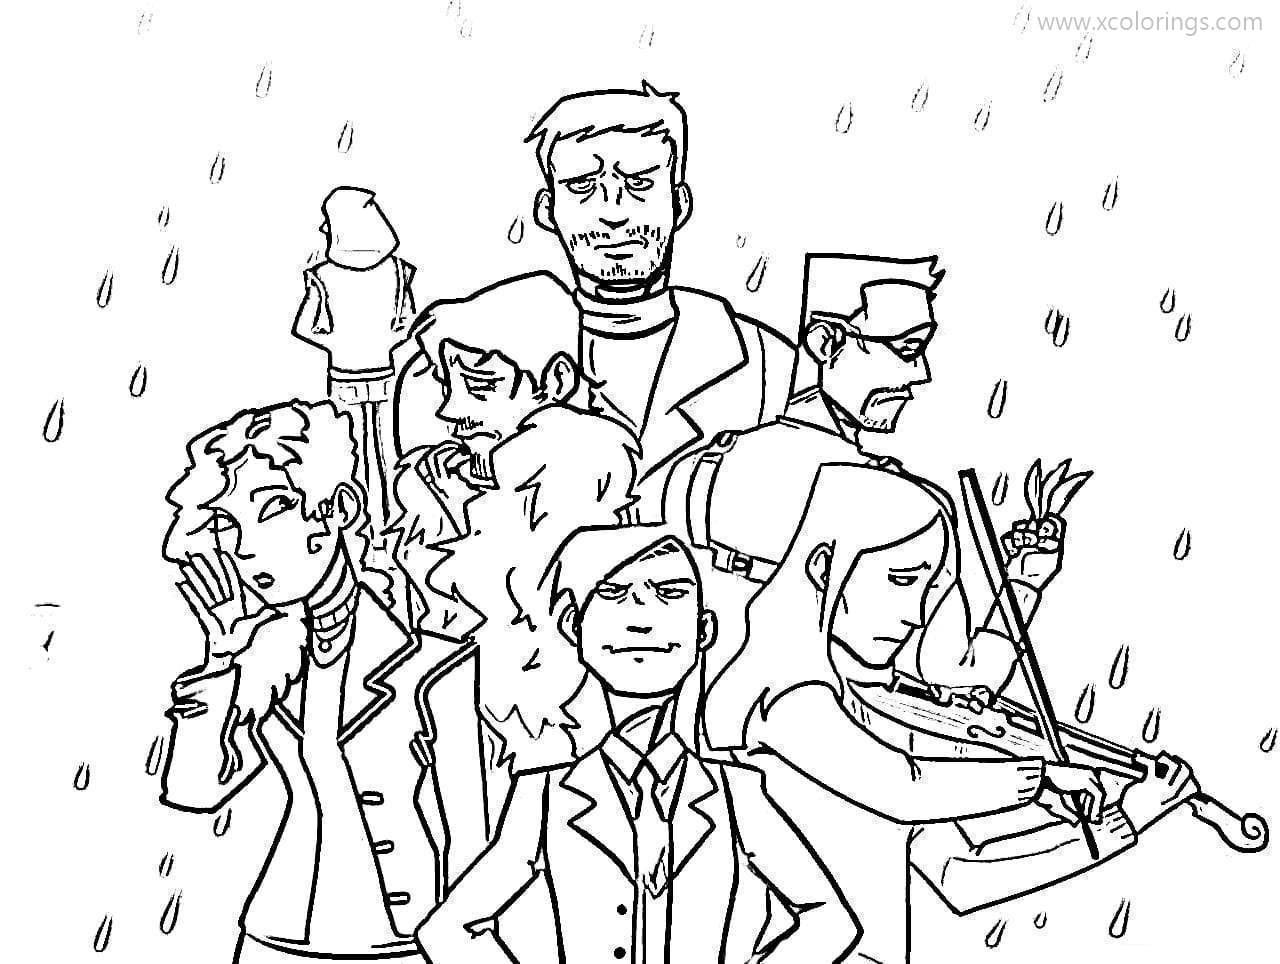 Free Umbrella Academy Coloring Pages Heroes will Save the World printable